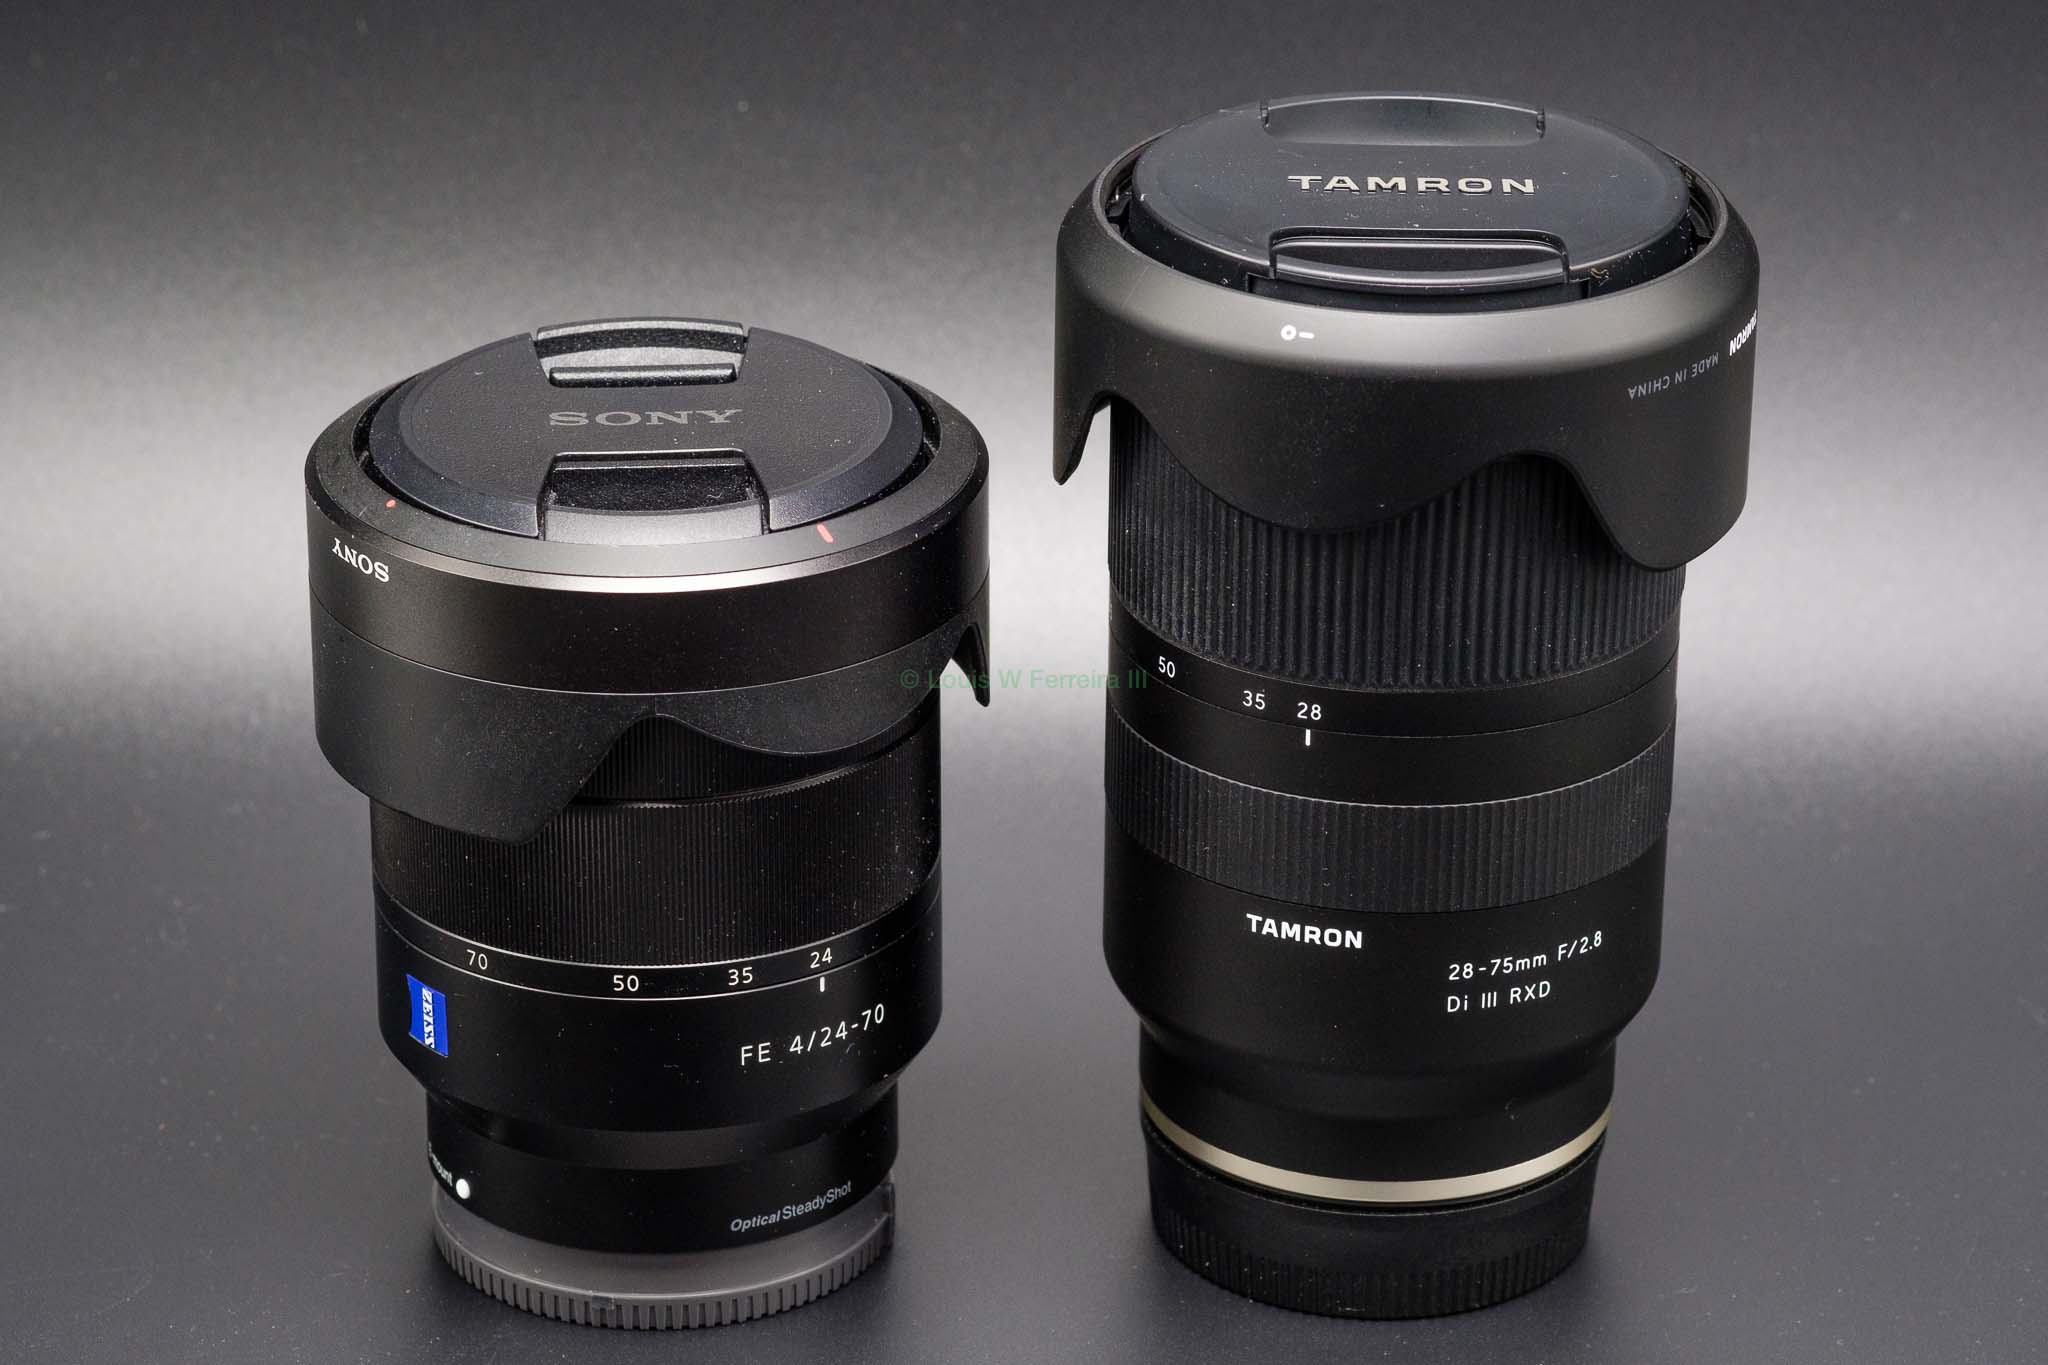 Tamron 28-75mm f/2.8 Di III RXD FE Compared to The Sony Zeiss 24 